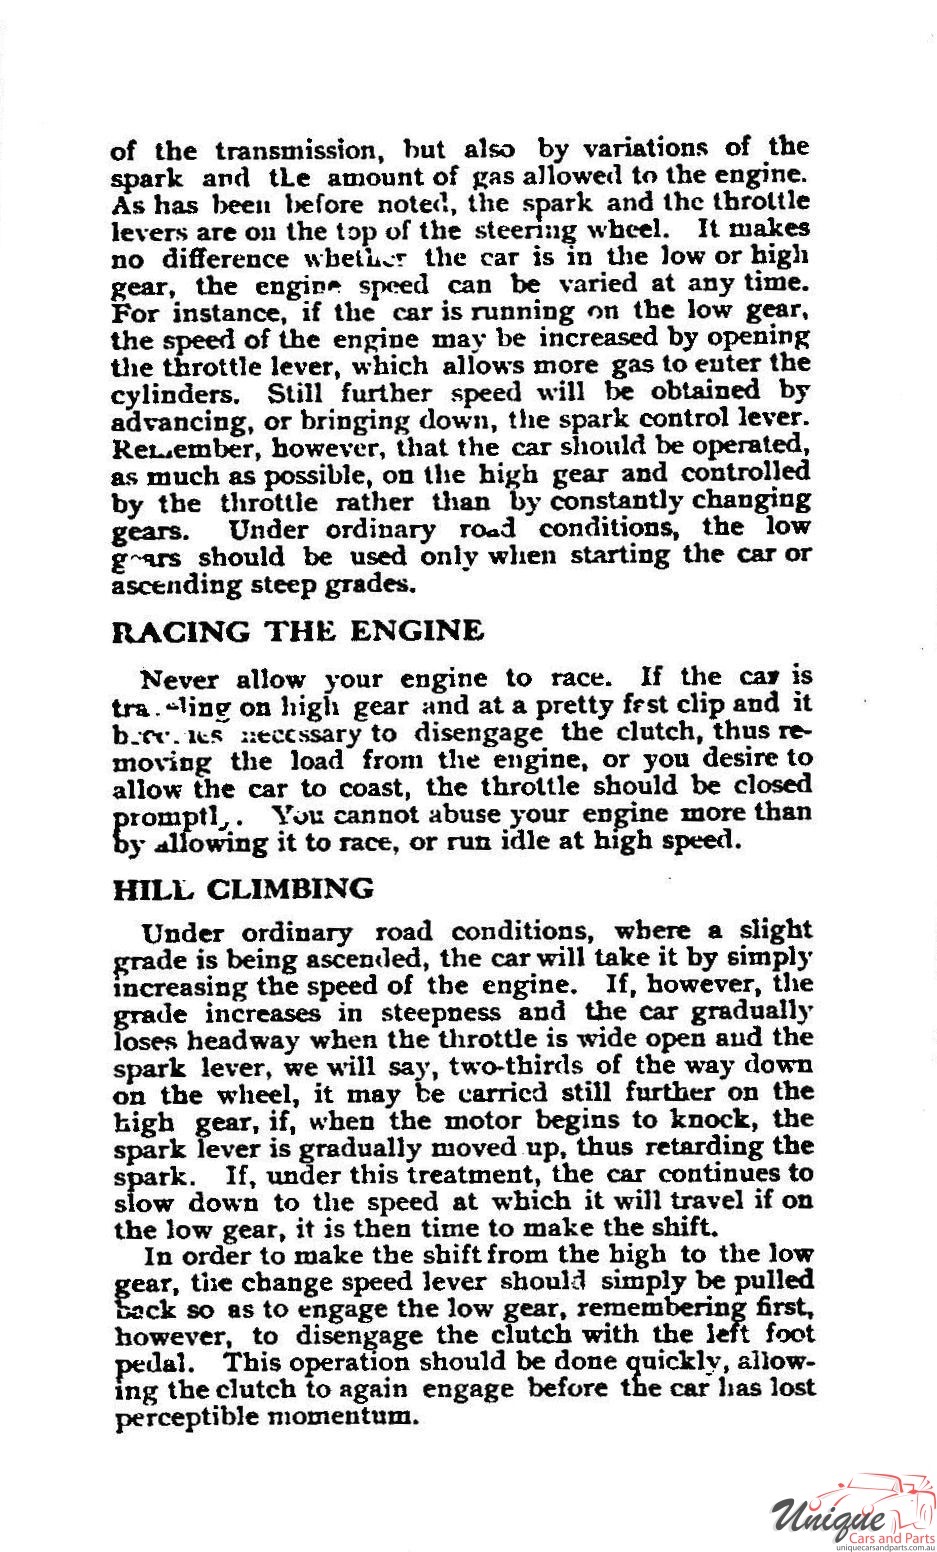 1910 Buick Model 14 Operating Instructions Page 5